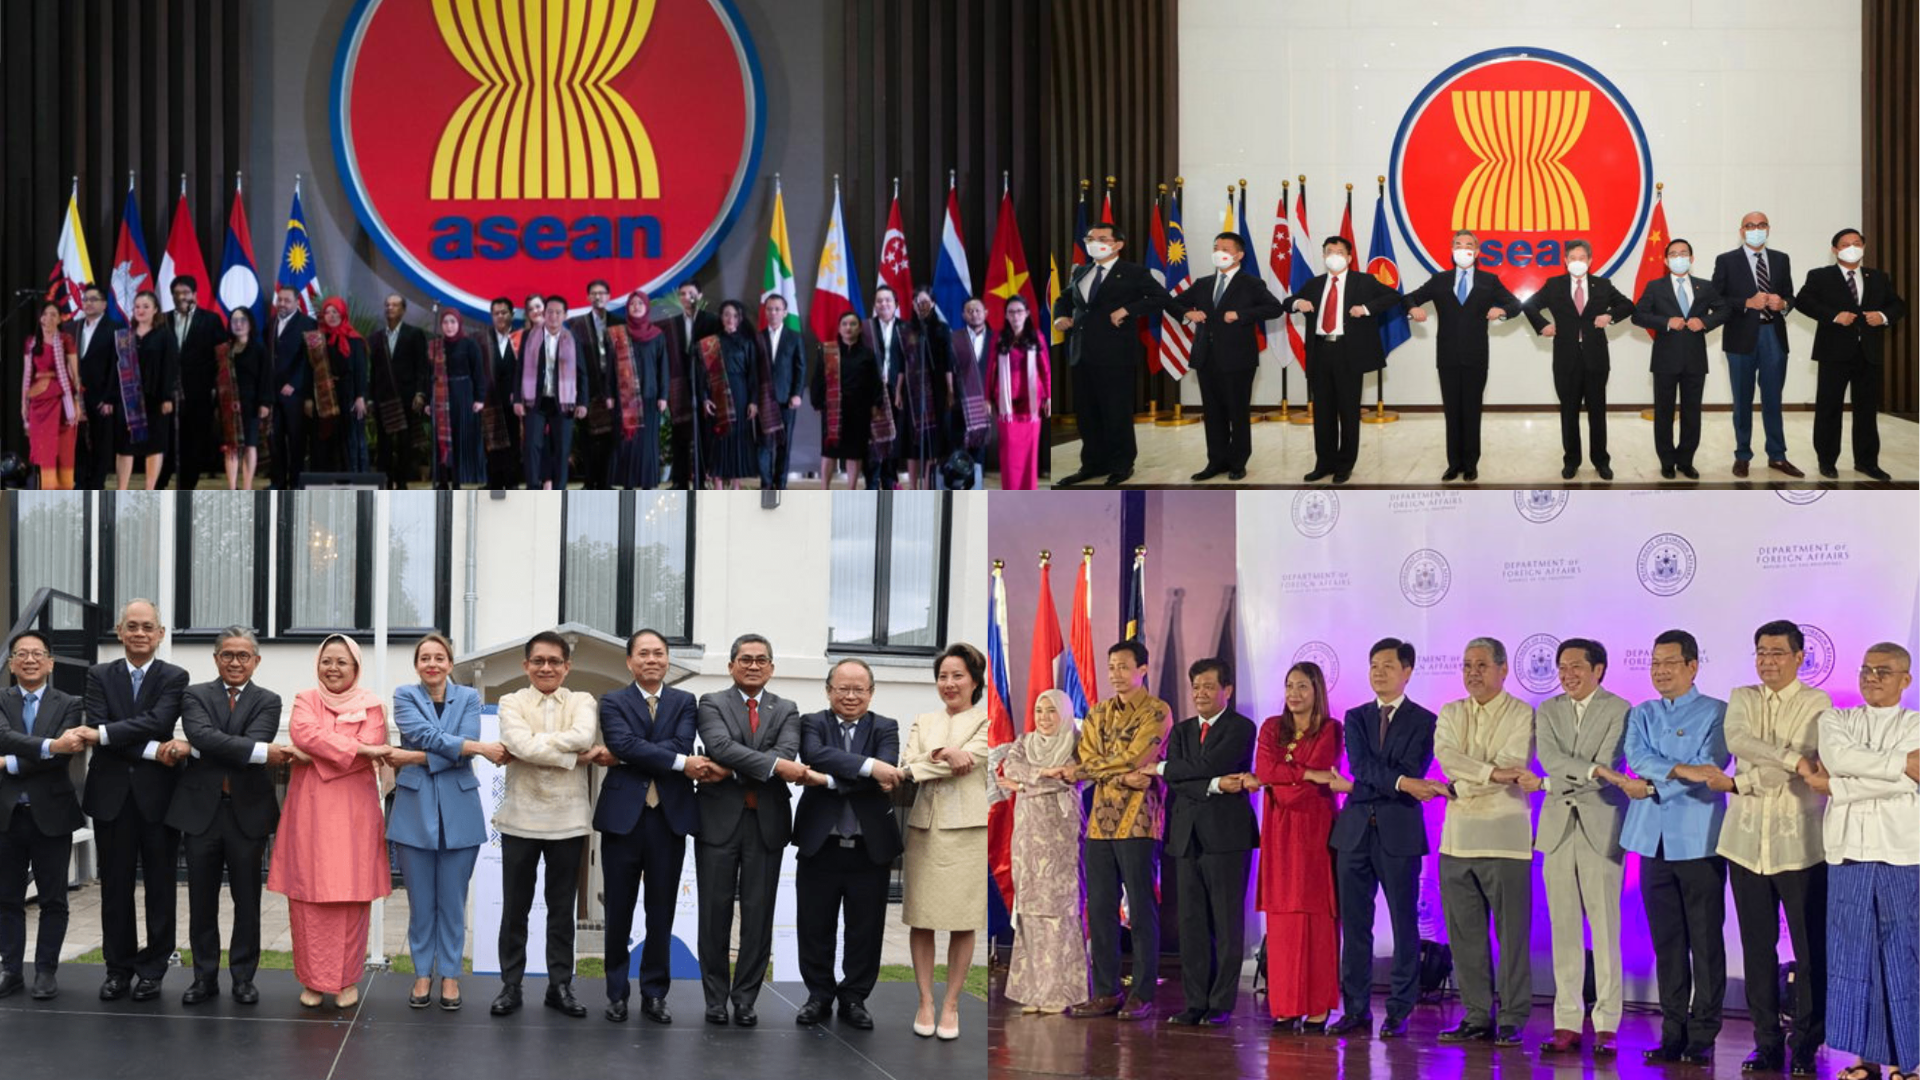 Young Asean should take interest in food security, inflation, climate change and many others through the provided platforms.